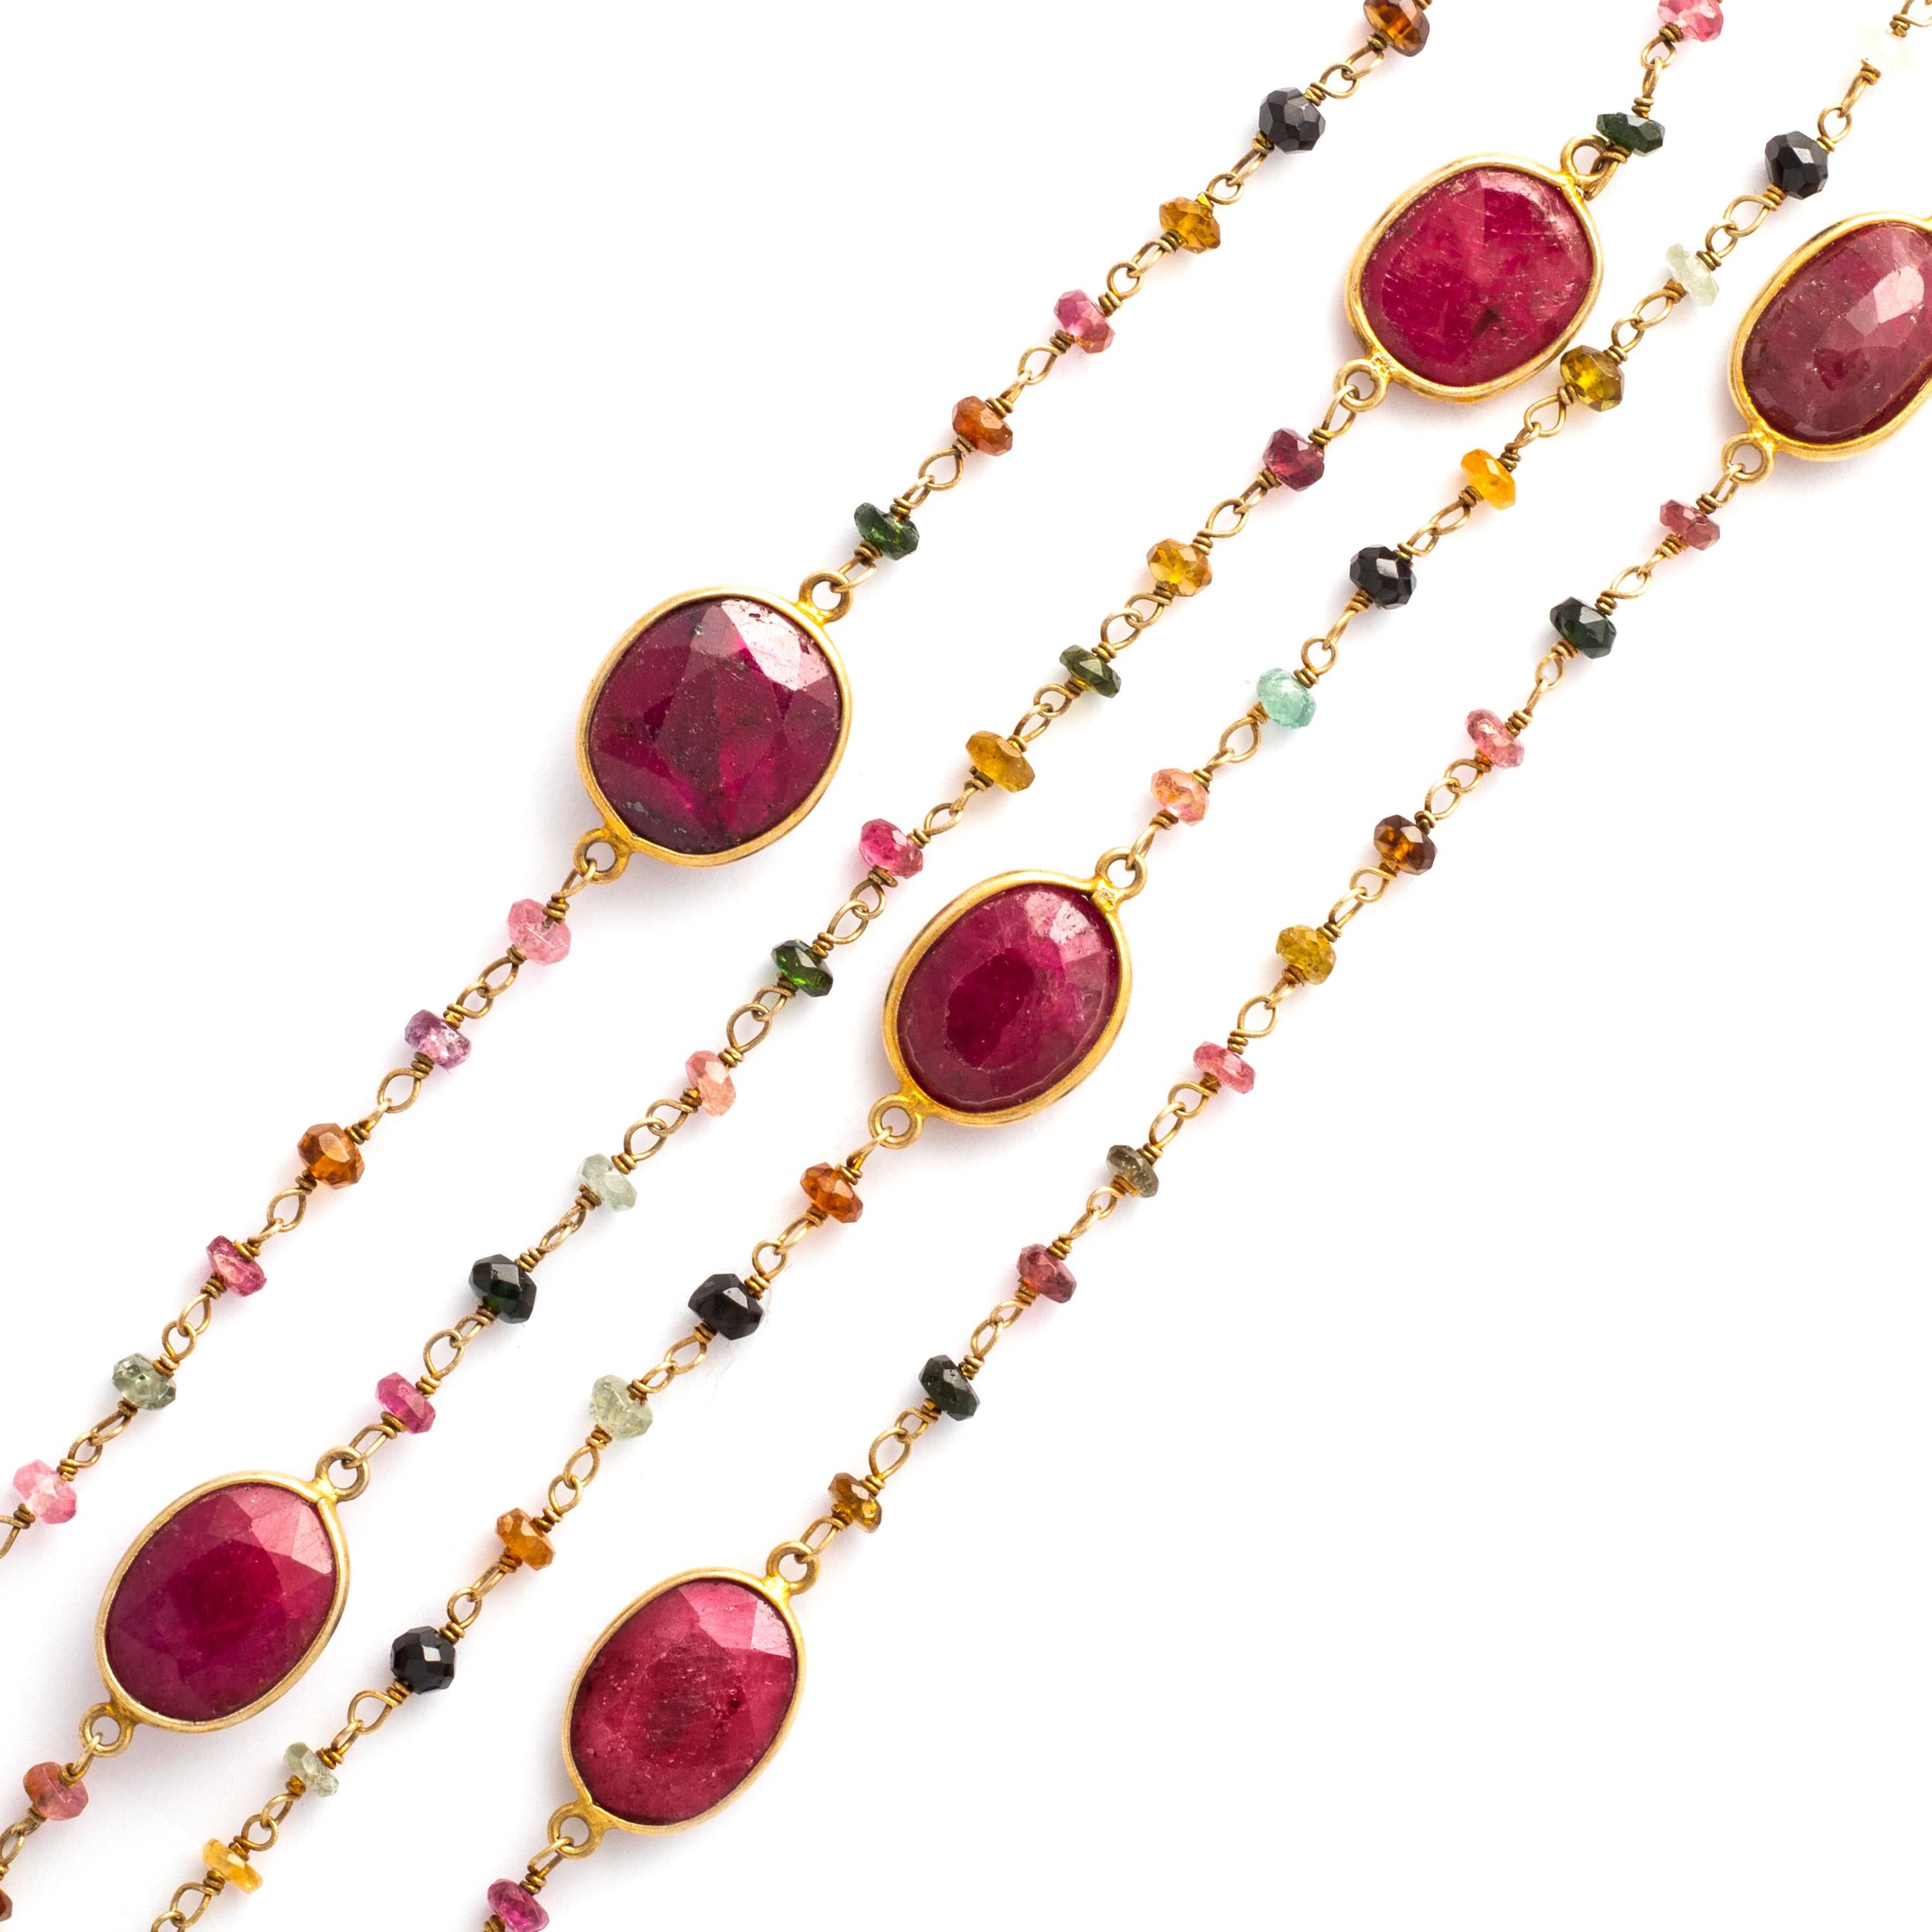 Anglo-Indian Sautoir Ruby and Precious Stones on Silver 925 Necklace For Sale